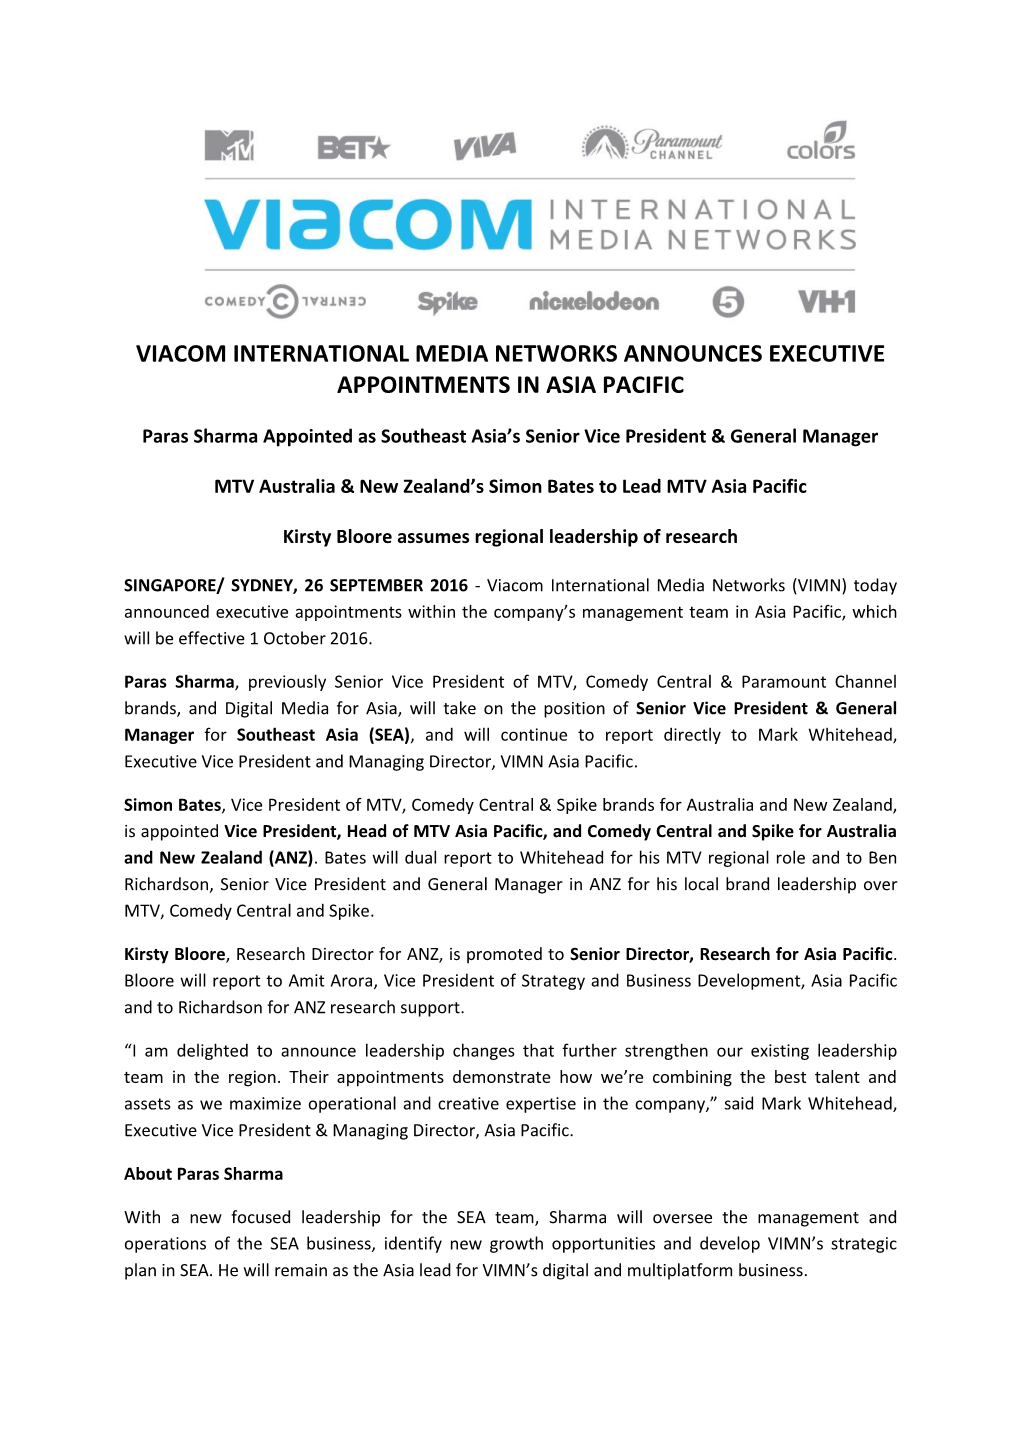 Viacom International Media Networks Announces Executive Appointments in Asia Pacific